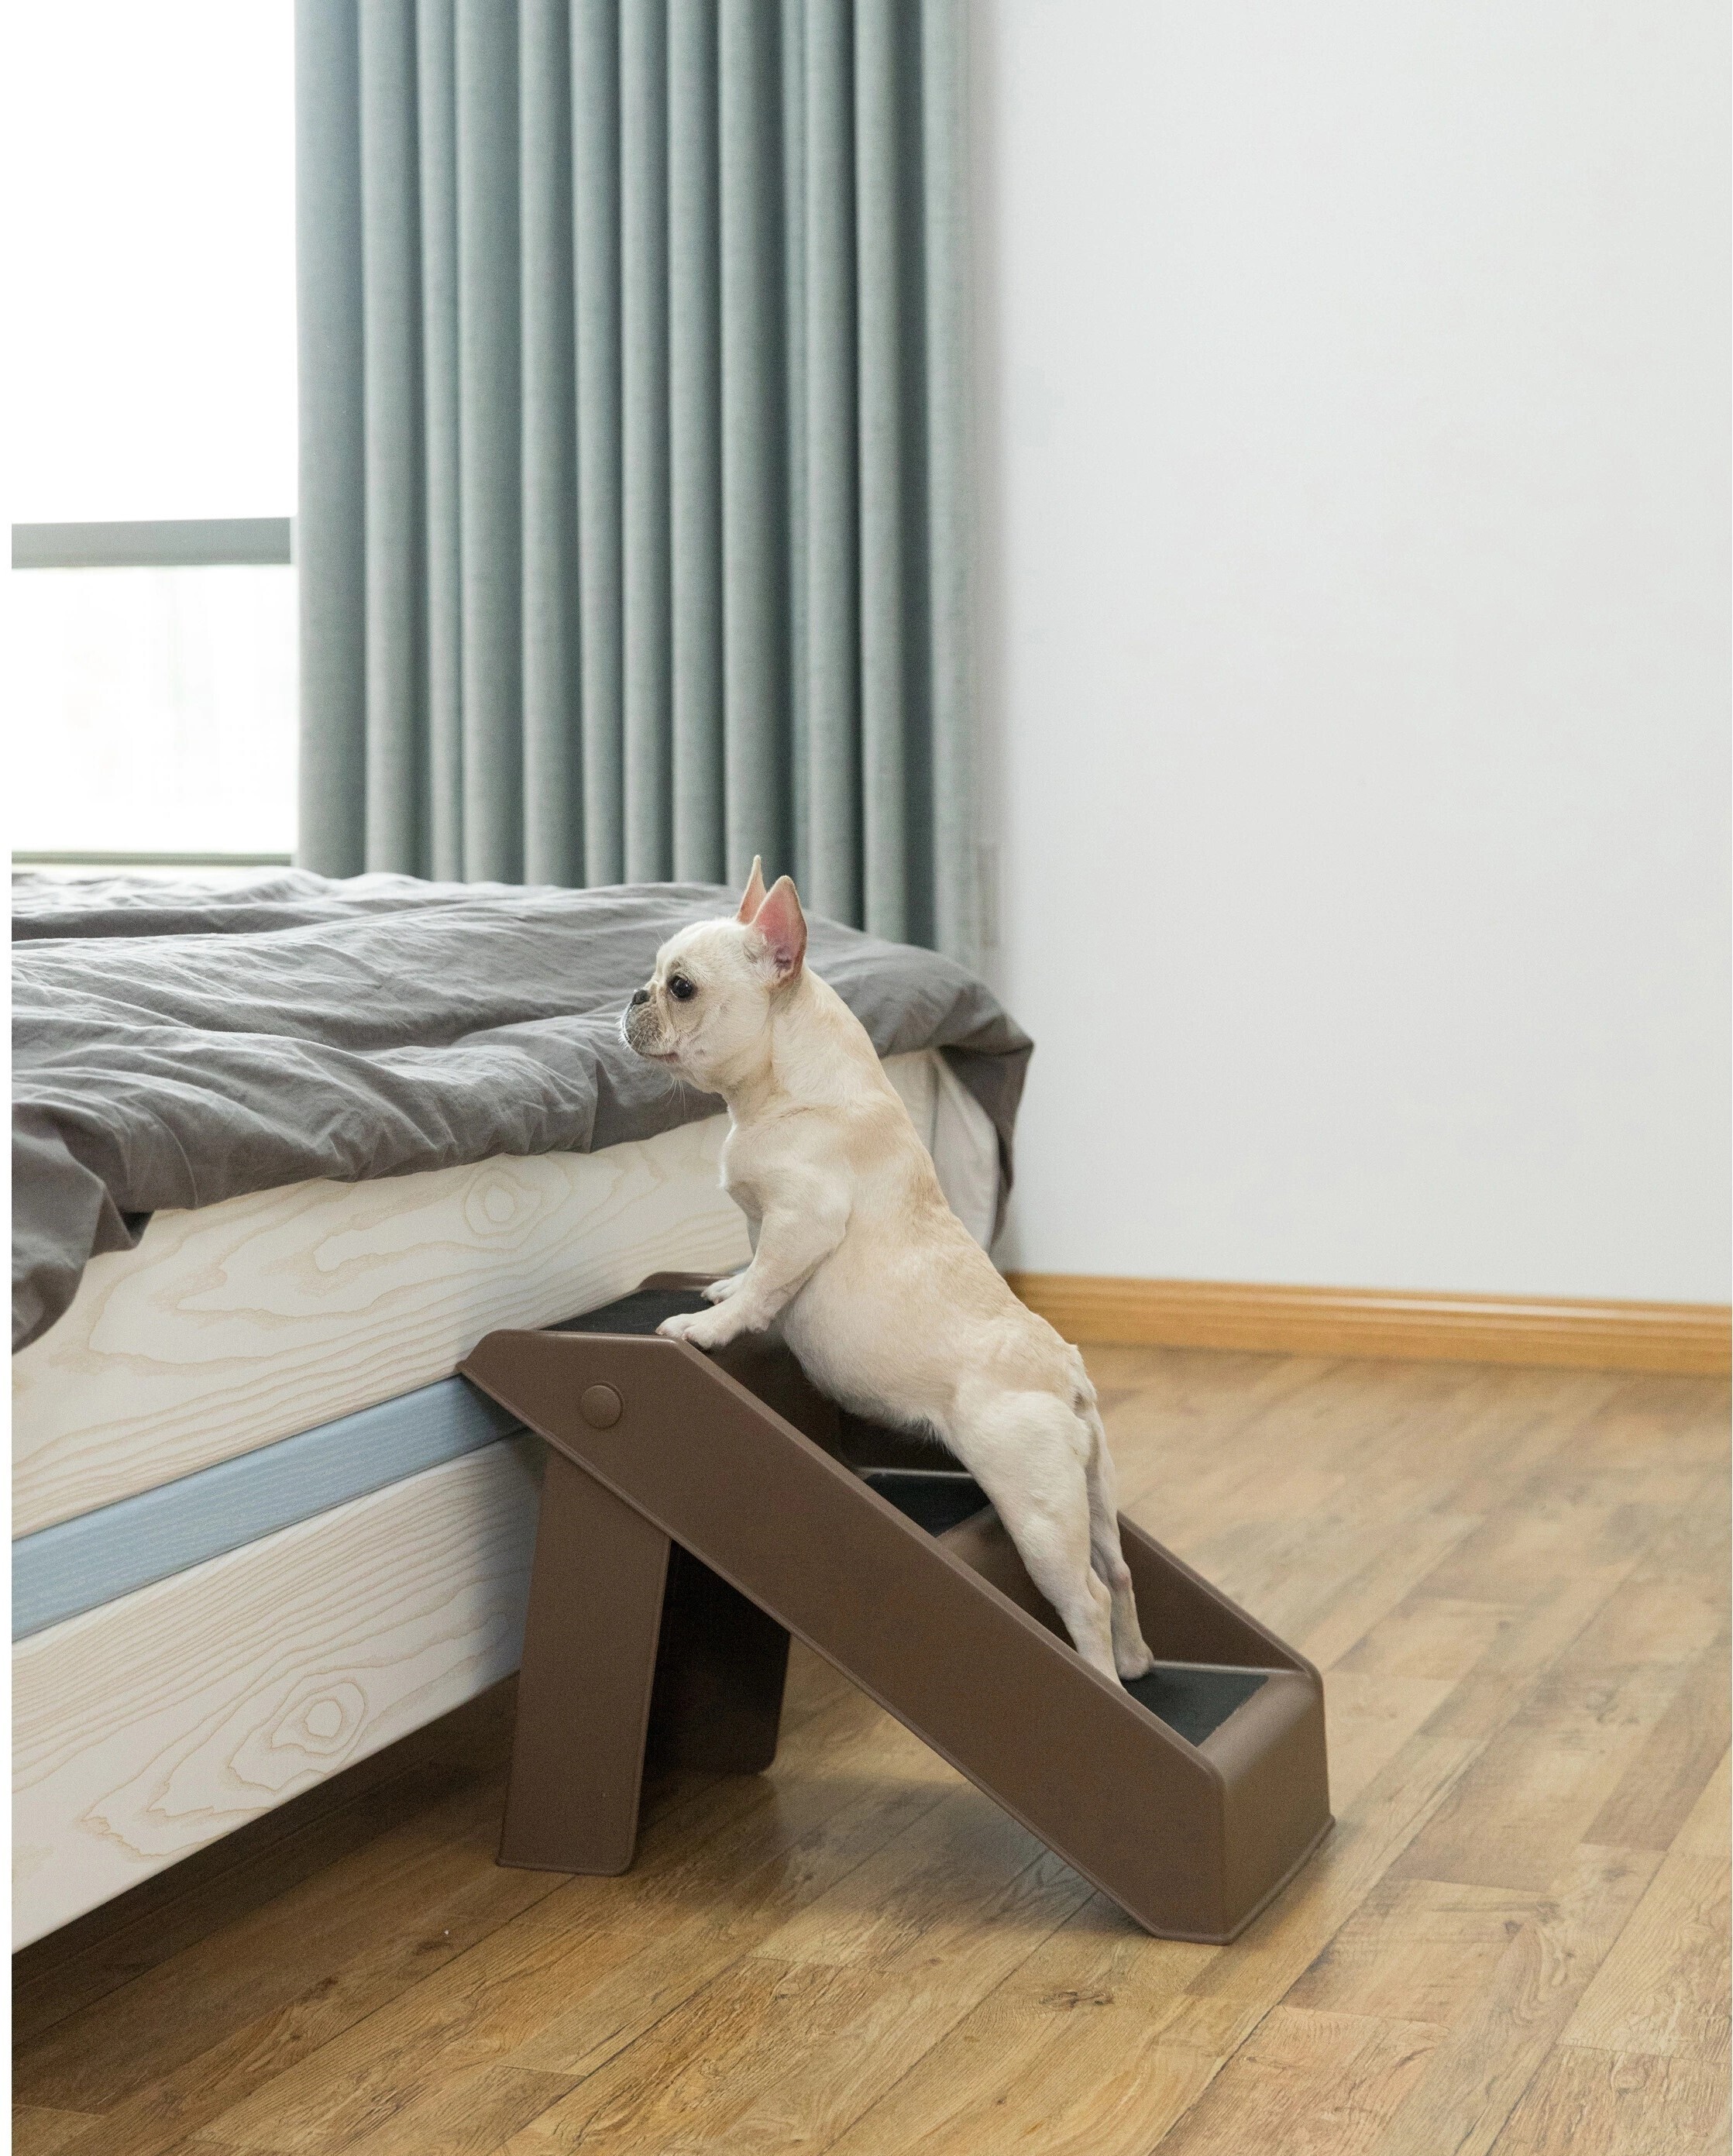 Budget friendly foldable dog stairs for high bed